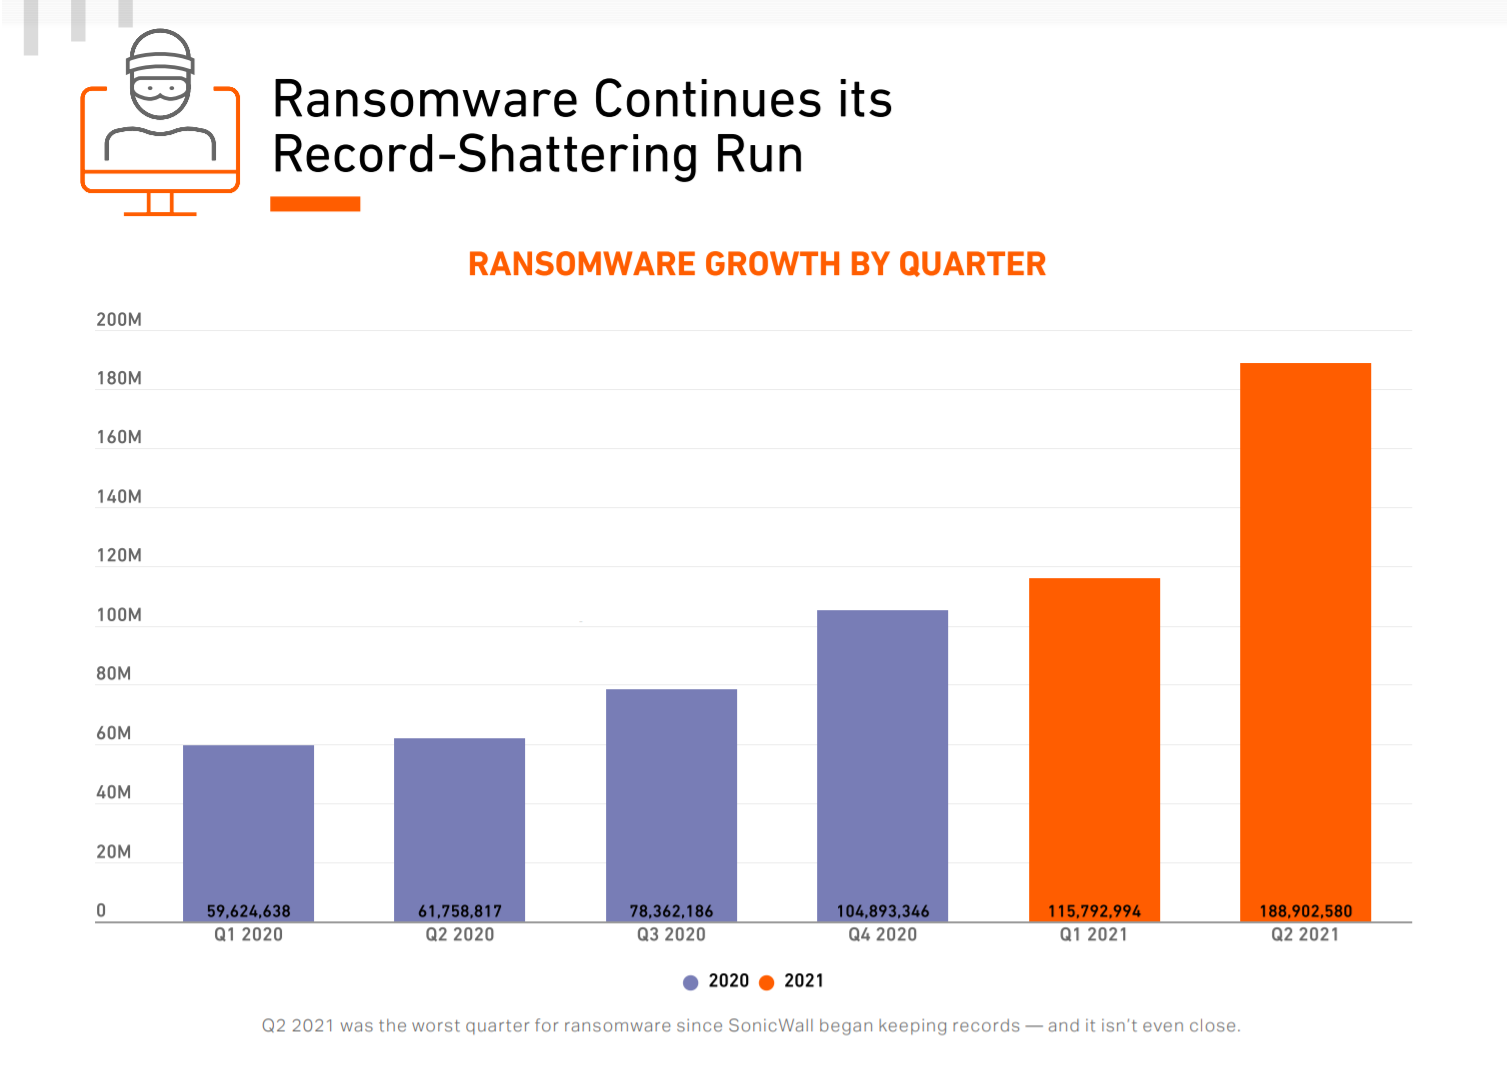 Ransomware Continues its Record-Shattering Run